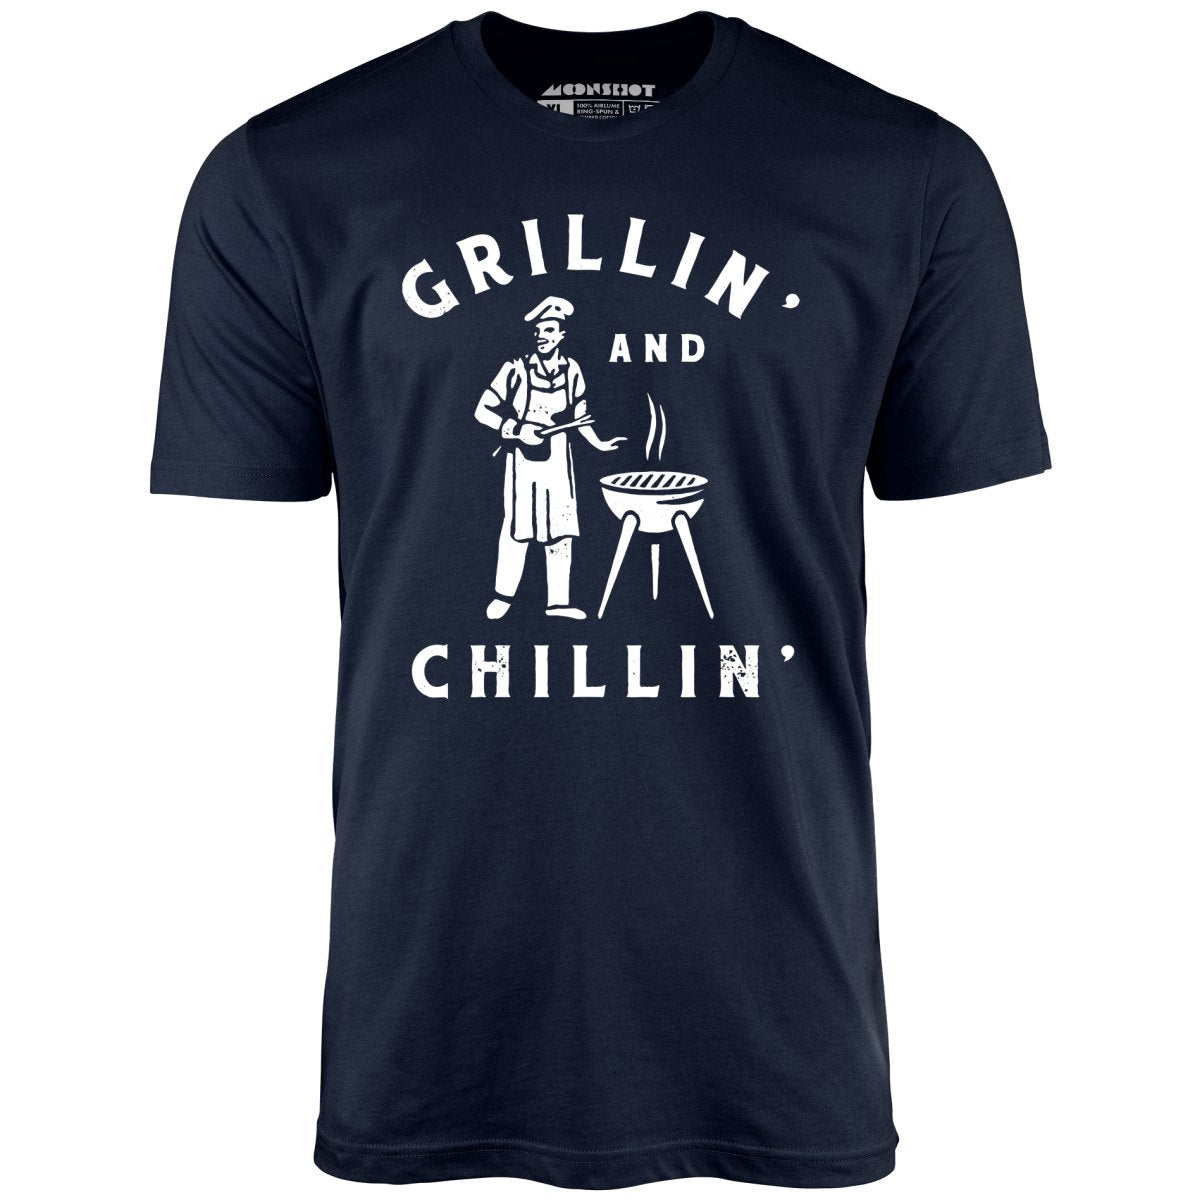 Grillin' and Chillin' - Unisex T-Shirt